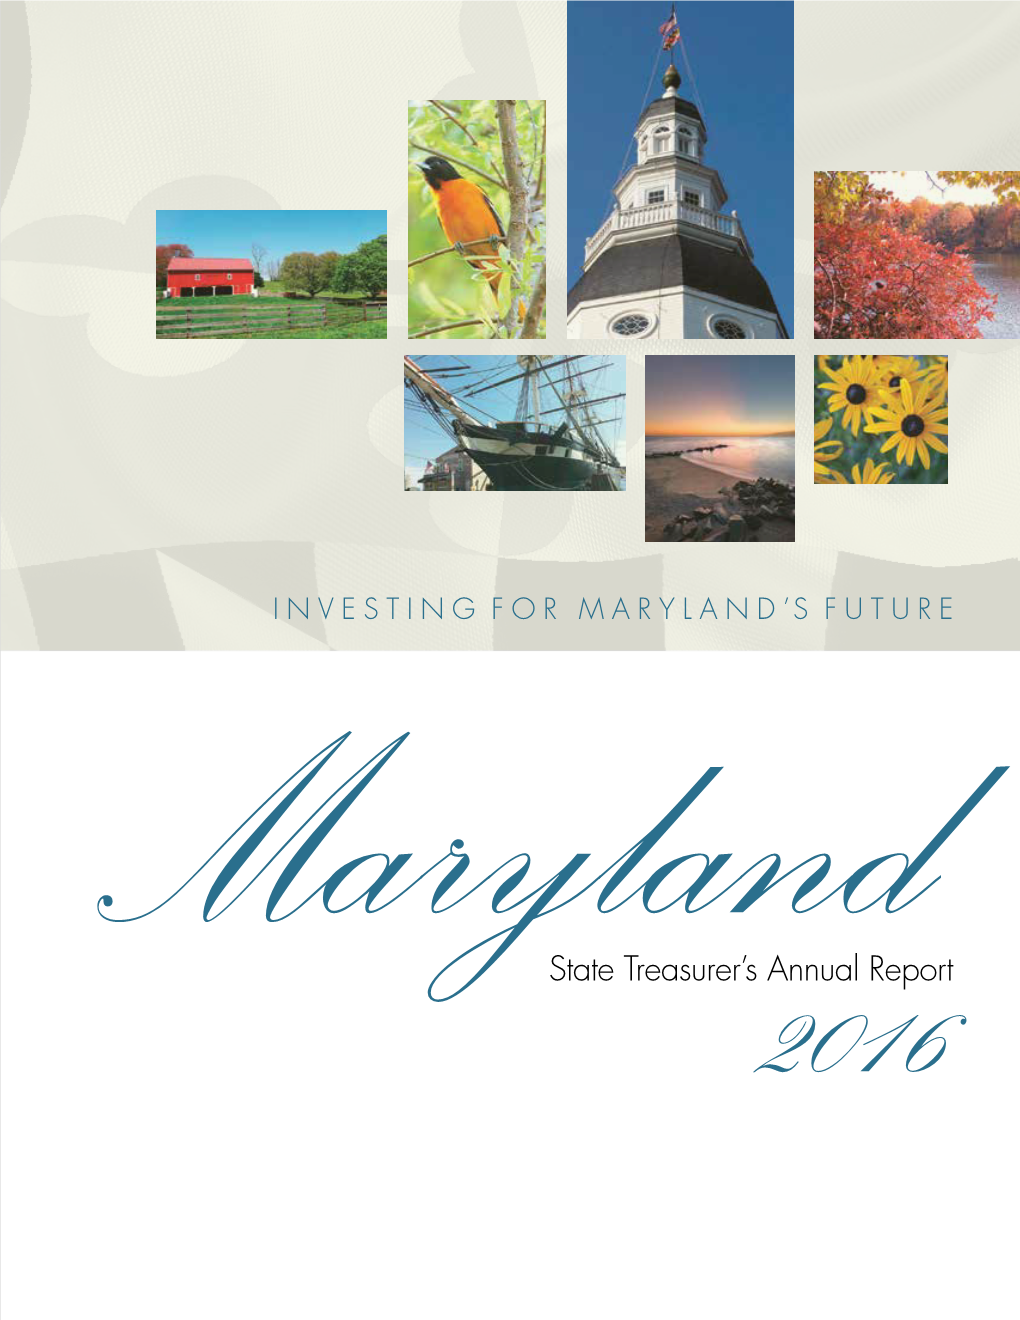 2016 Maryland State Treasurer's Annual Report